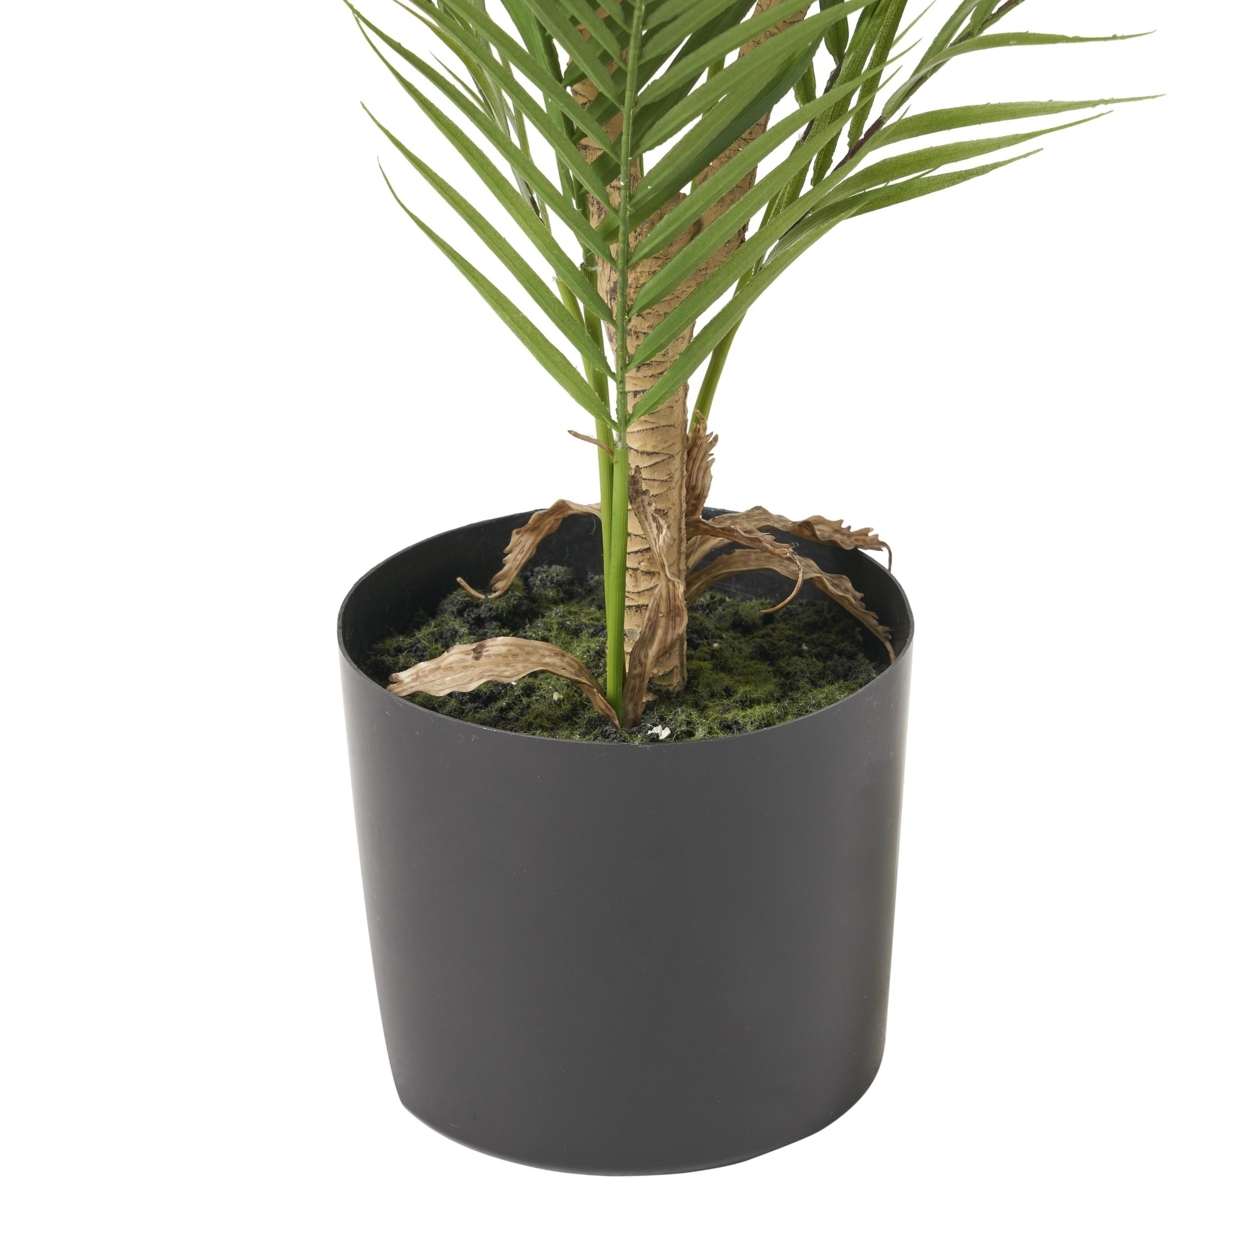 Troup Artificial Tabletop Palm Tree, Green - 4' X 2.5'